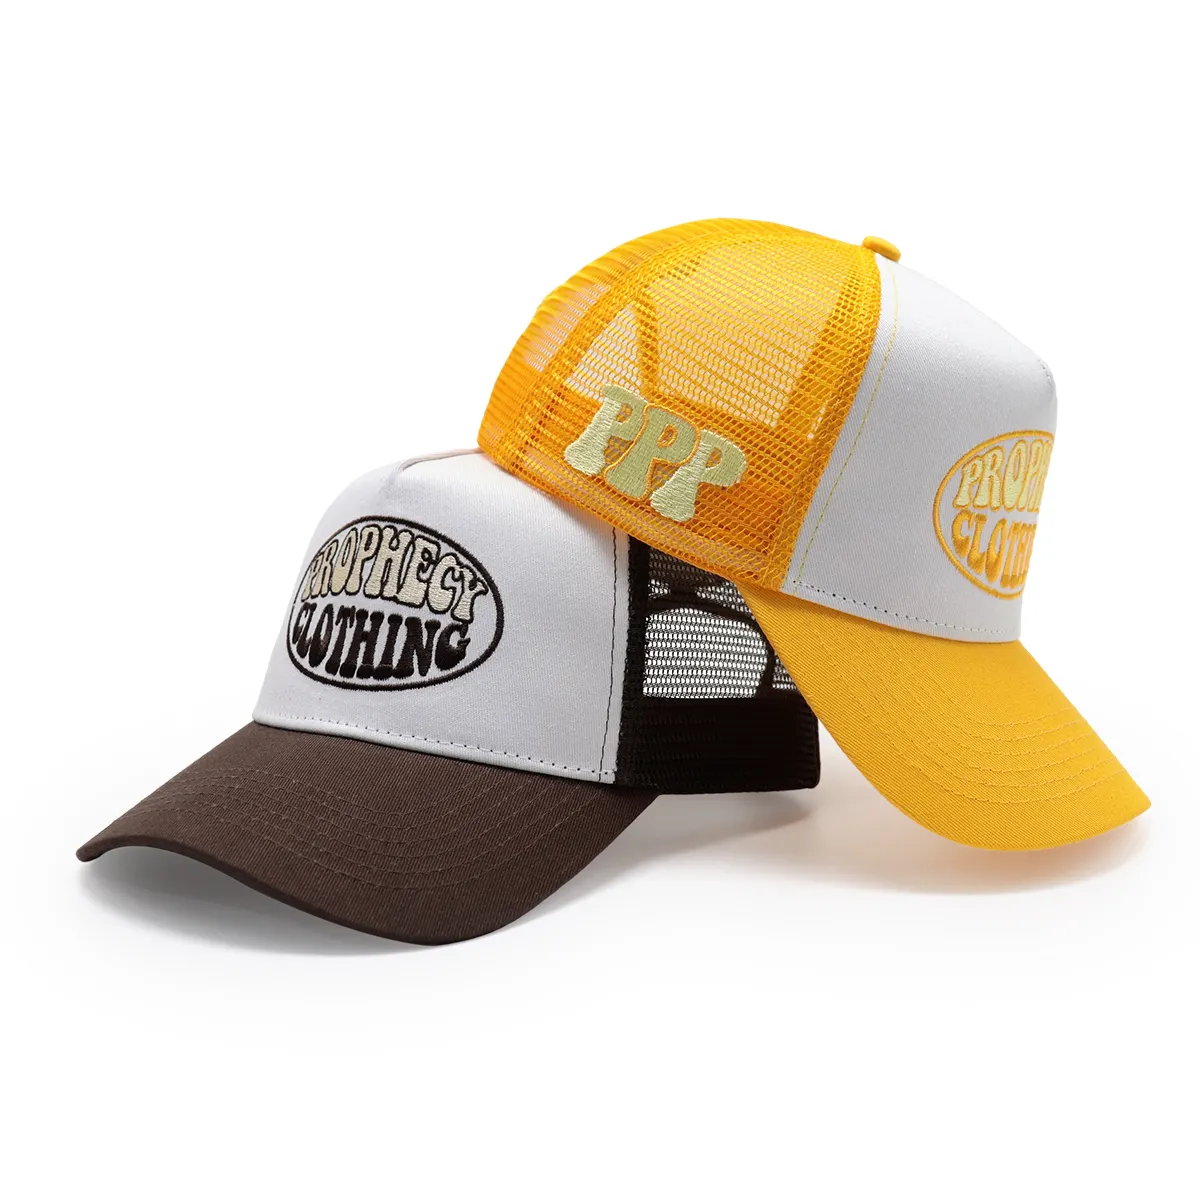 design your own embroidery logo custom high quality trucker hats